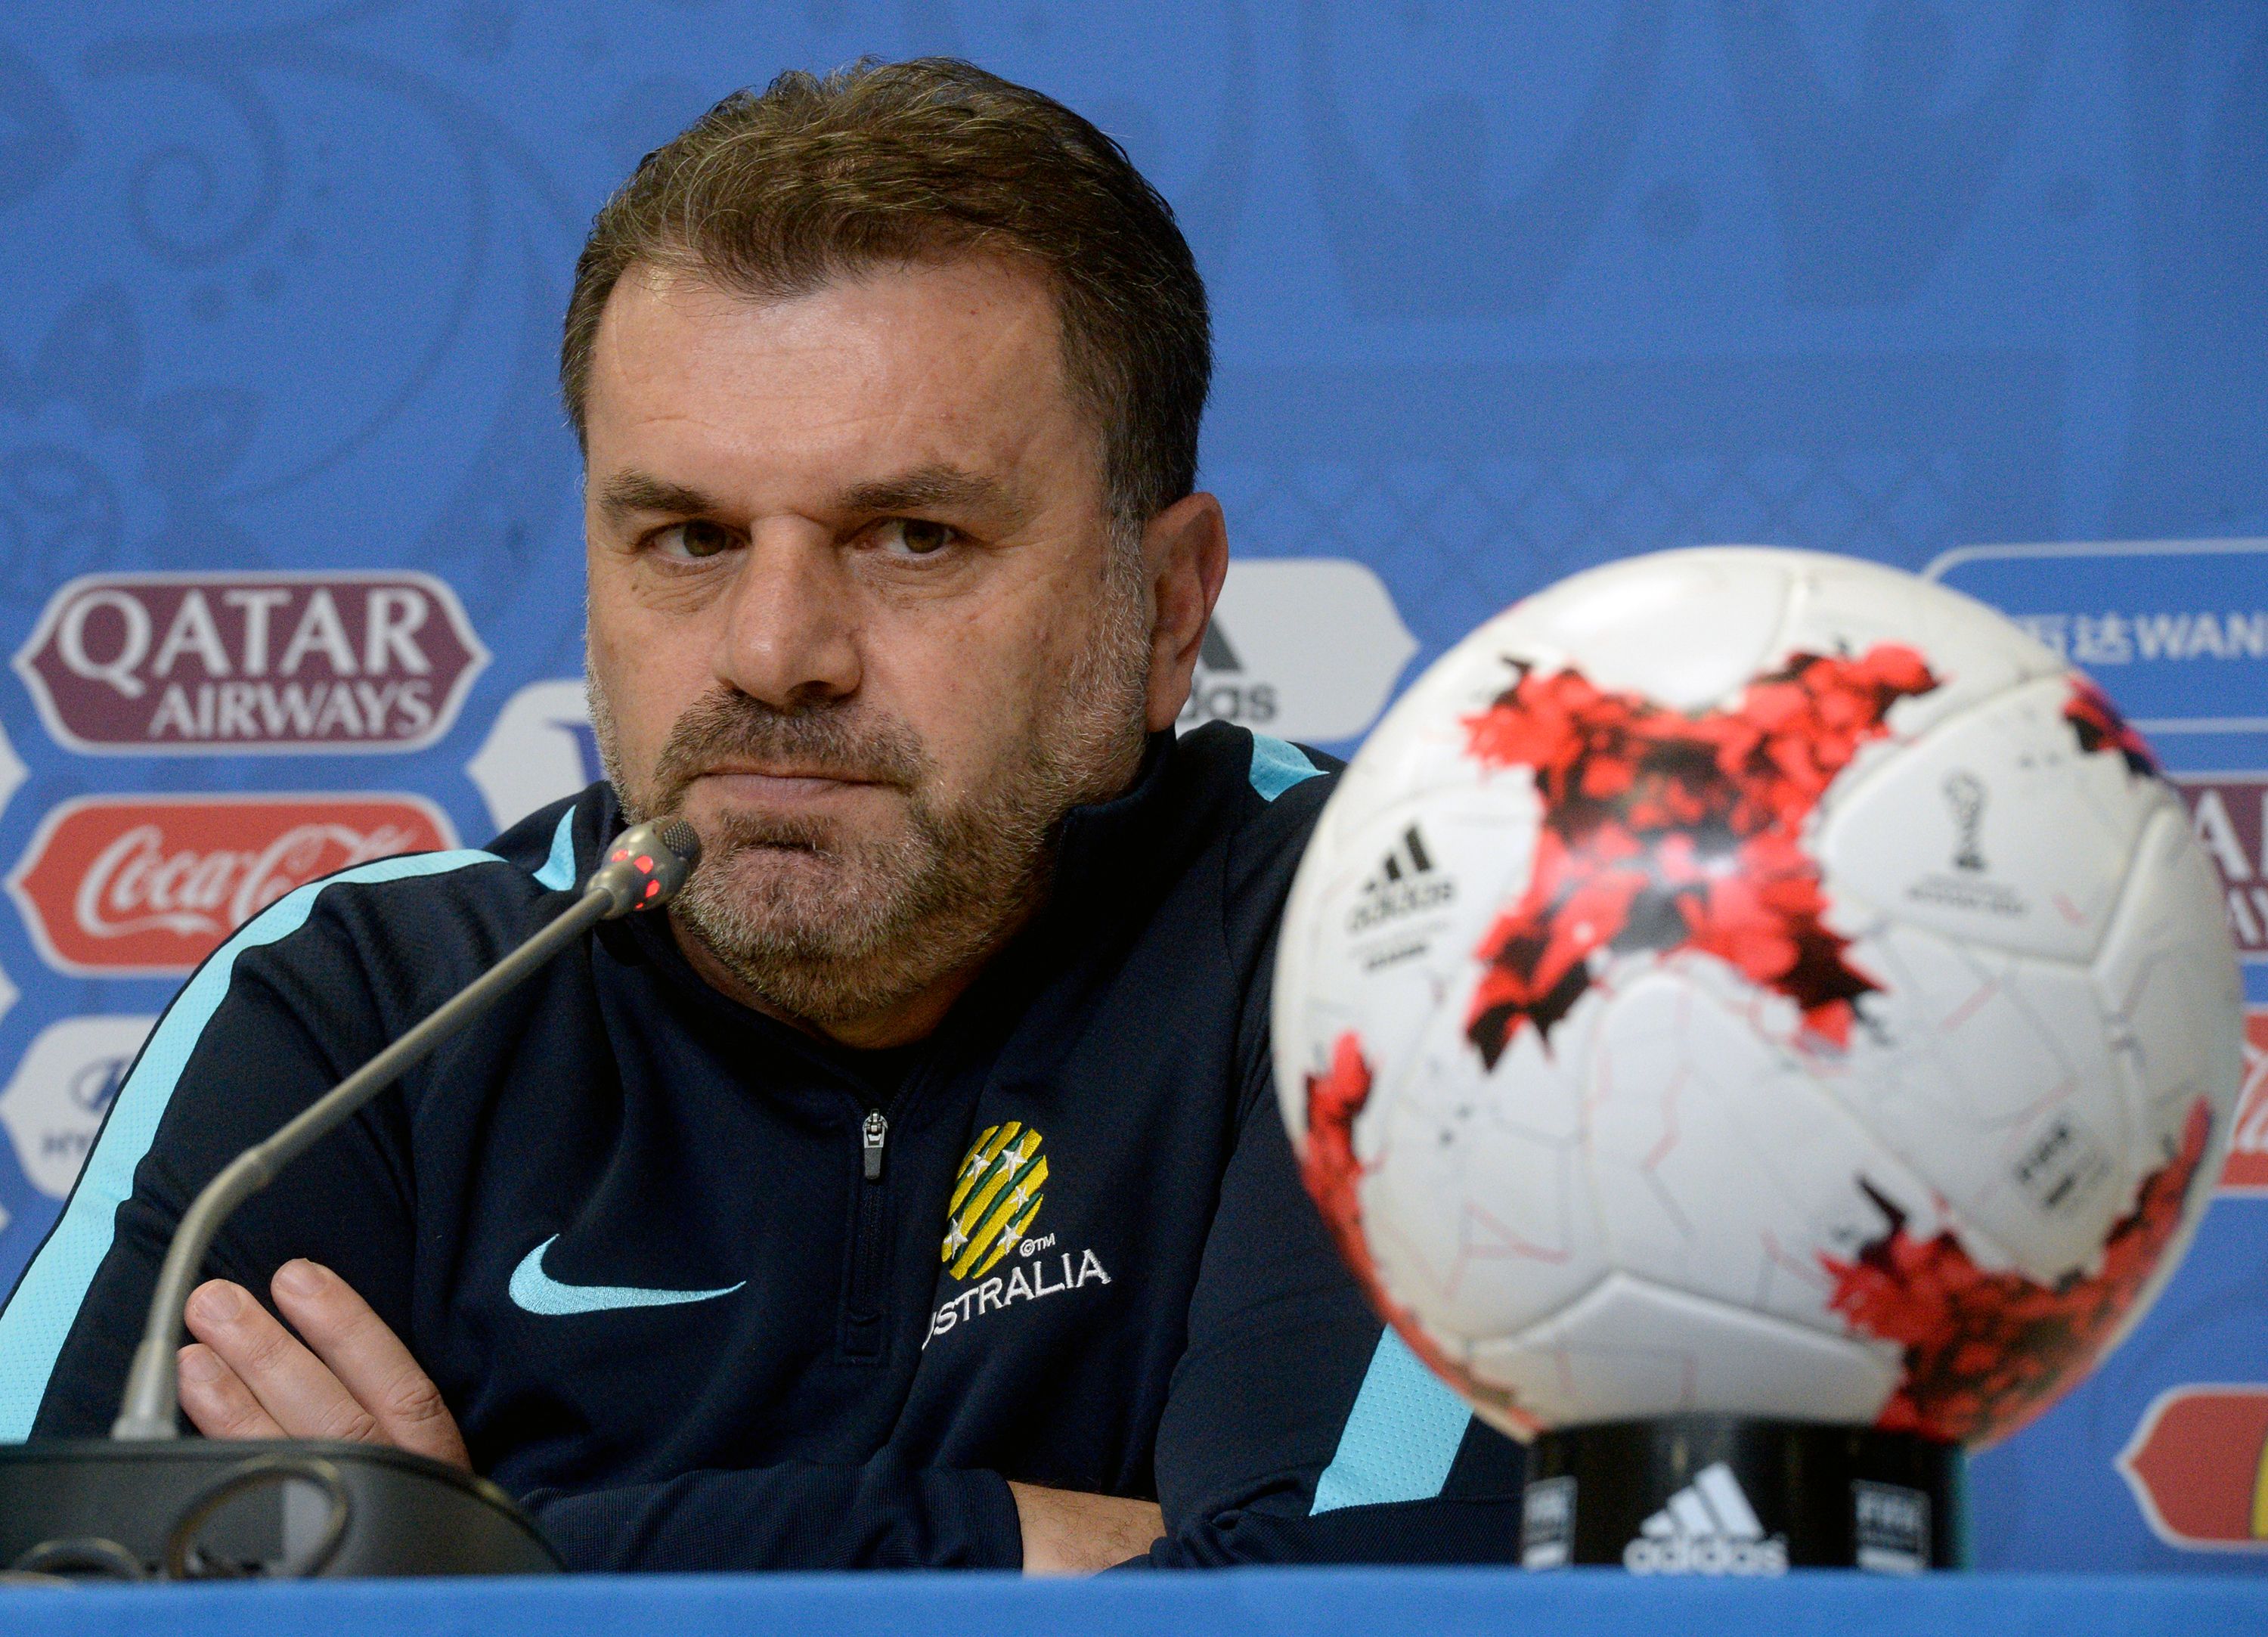 Ange Postecoglou could begin a steady revival at Tottenham, but needs support